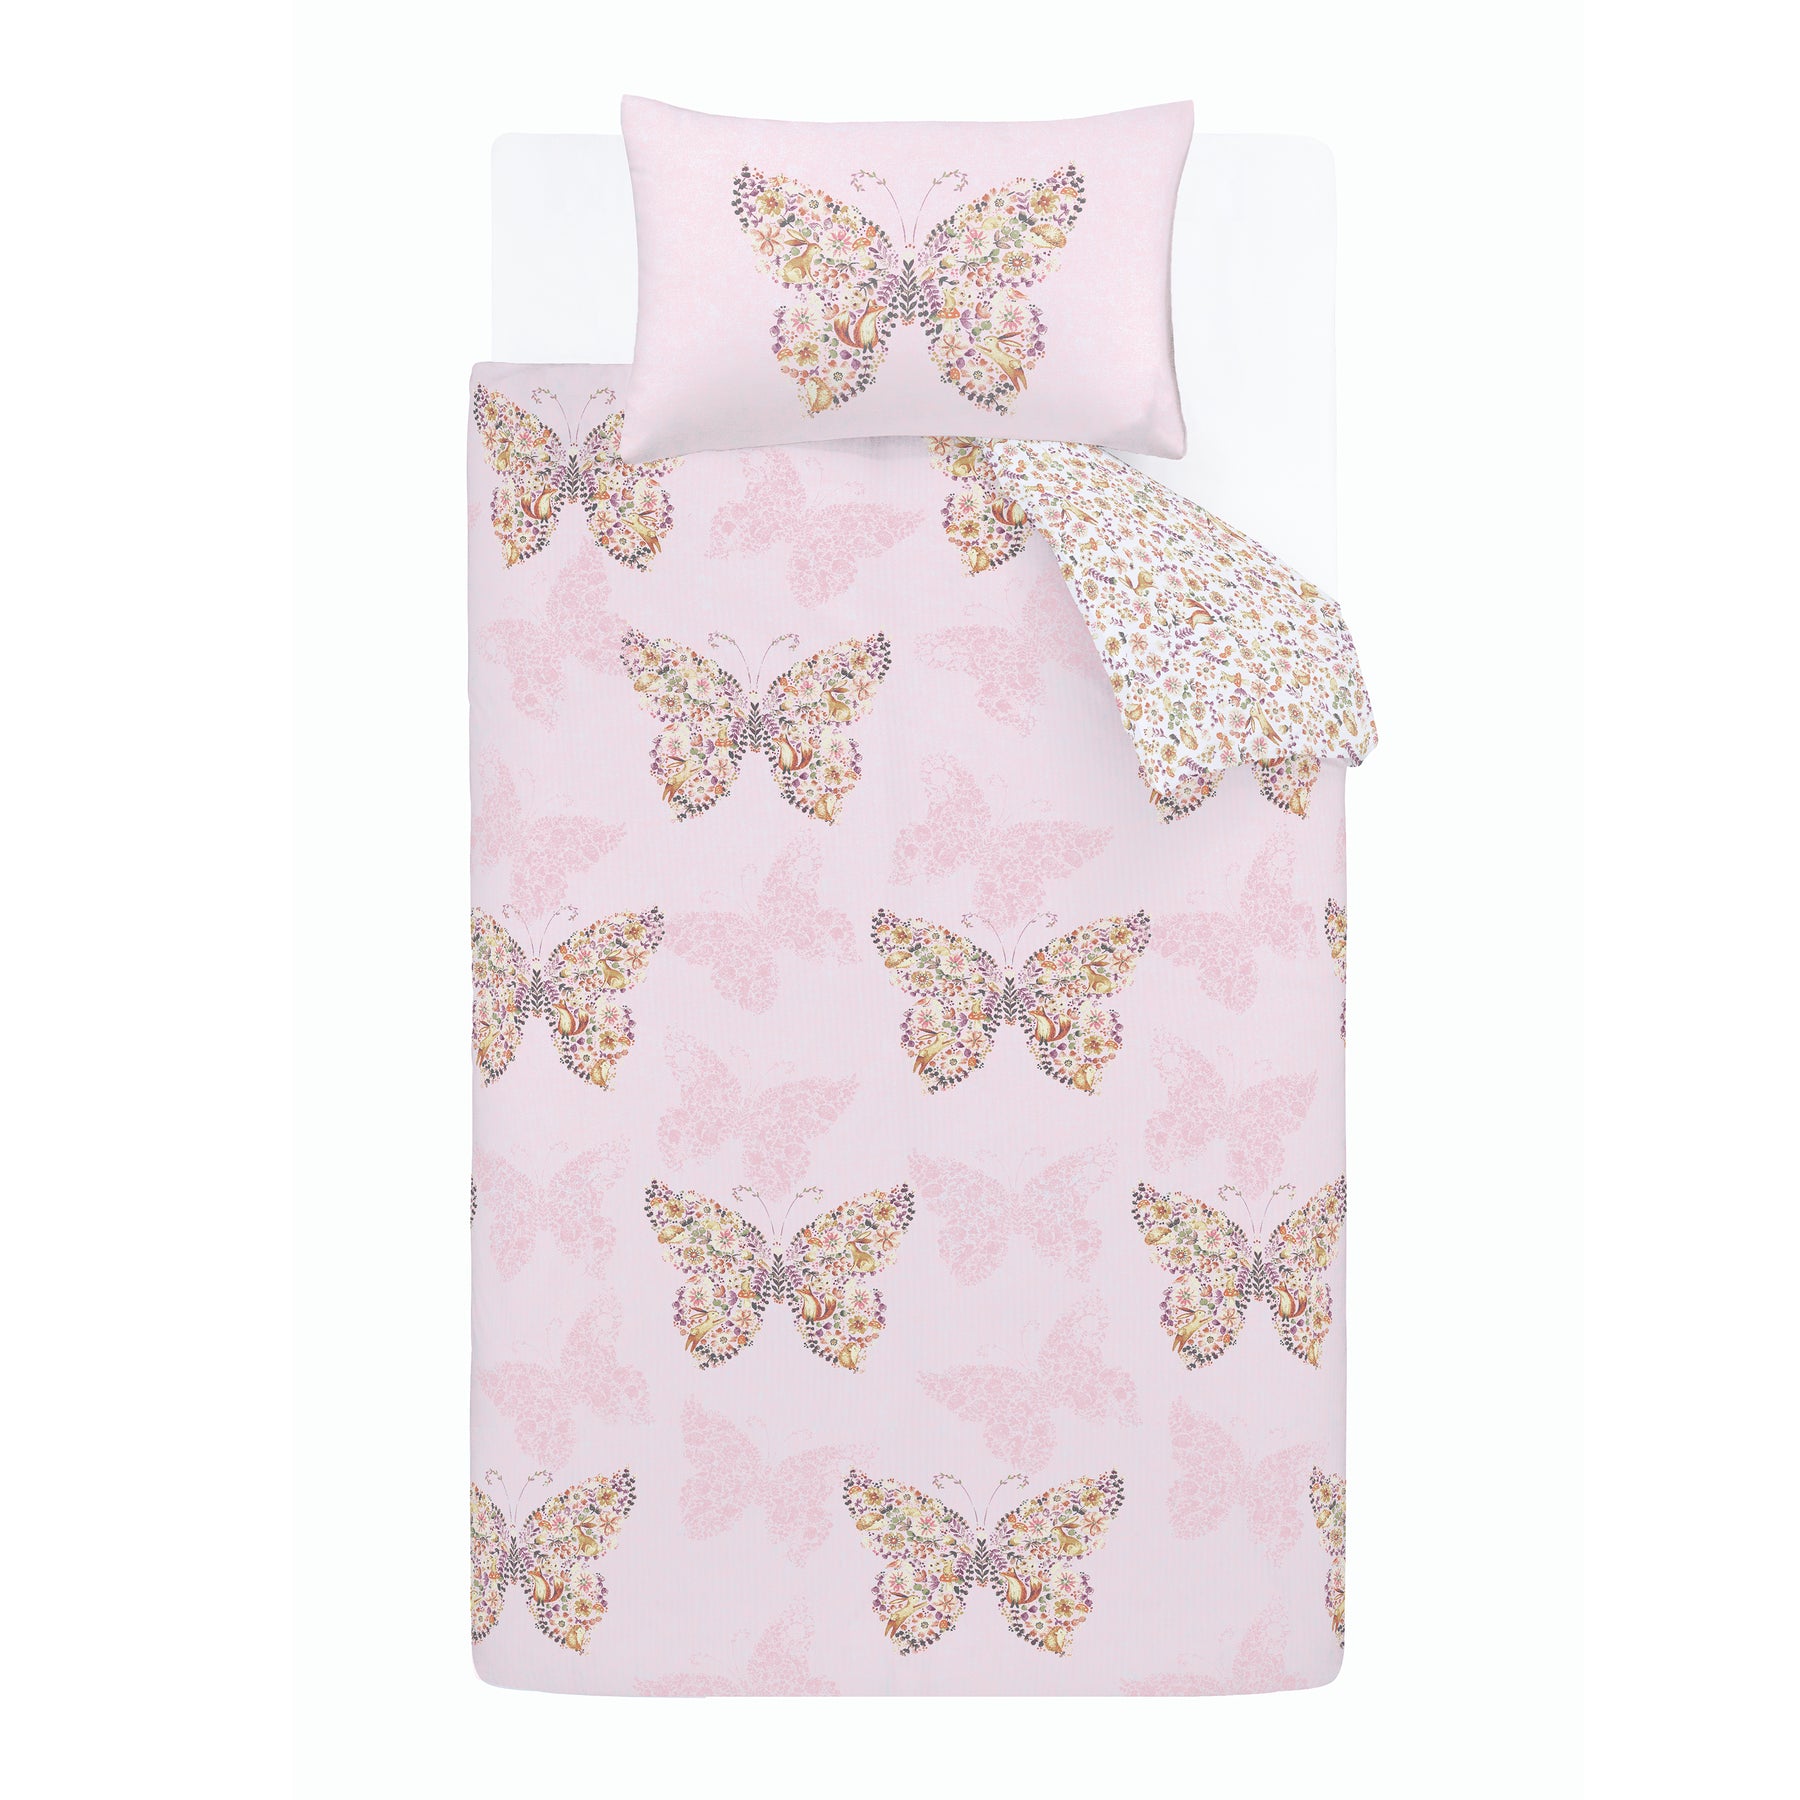 Catherine Lansfield Enchanted Butterfly Childrens Bedding Pink